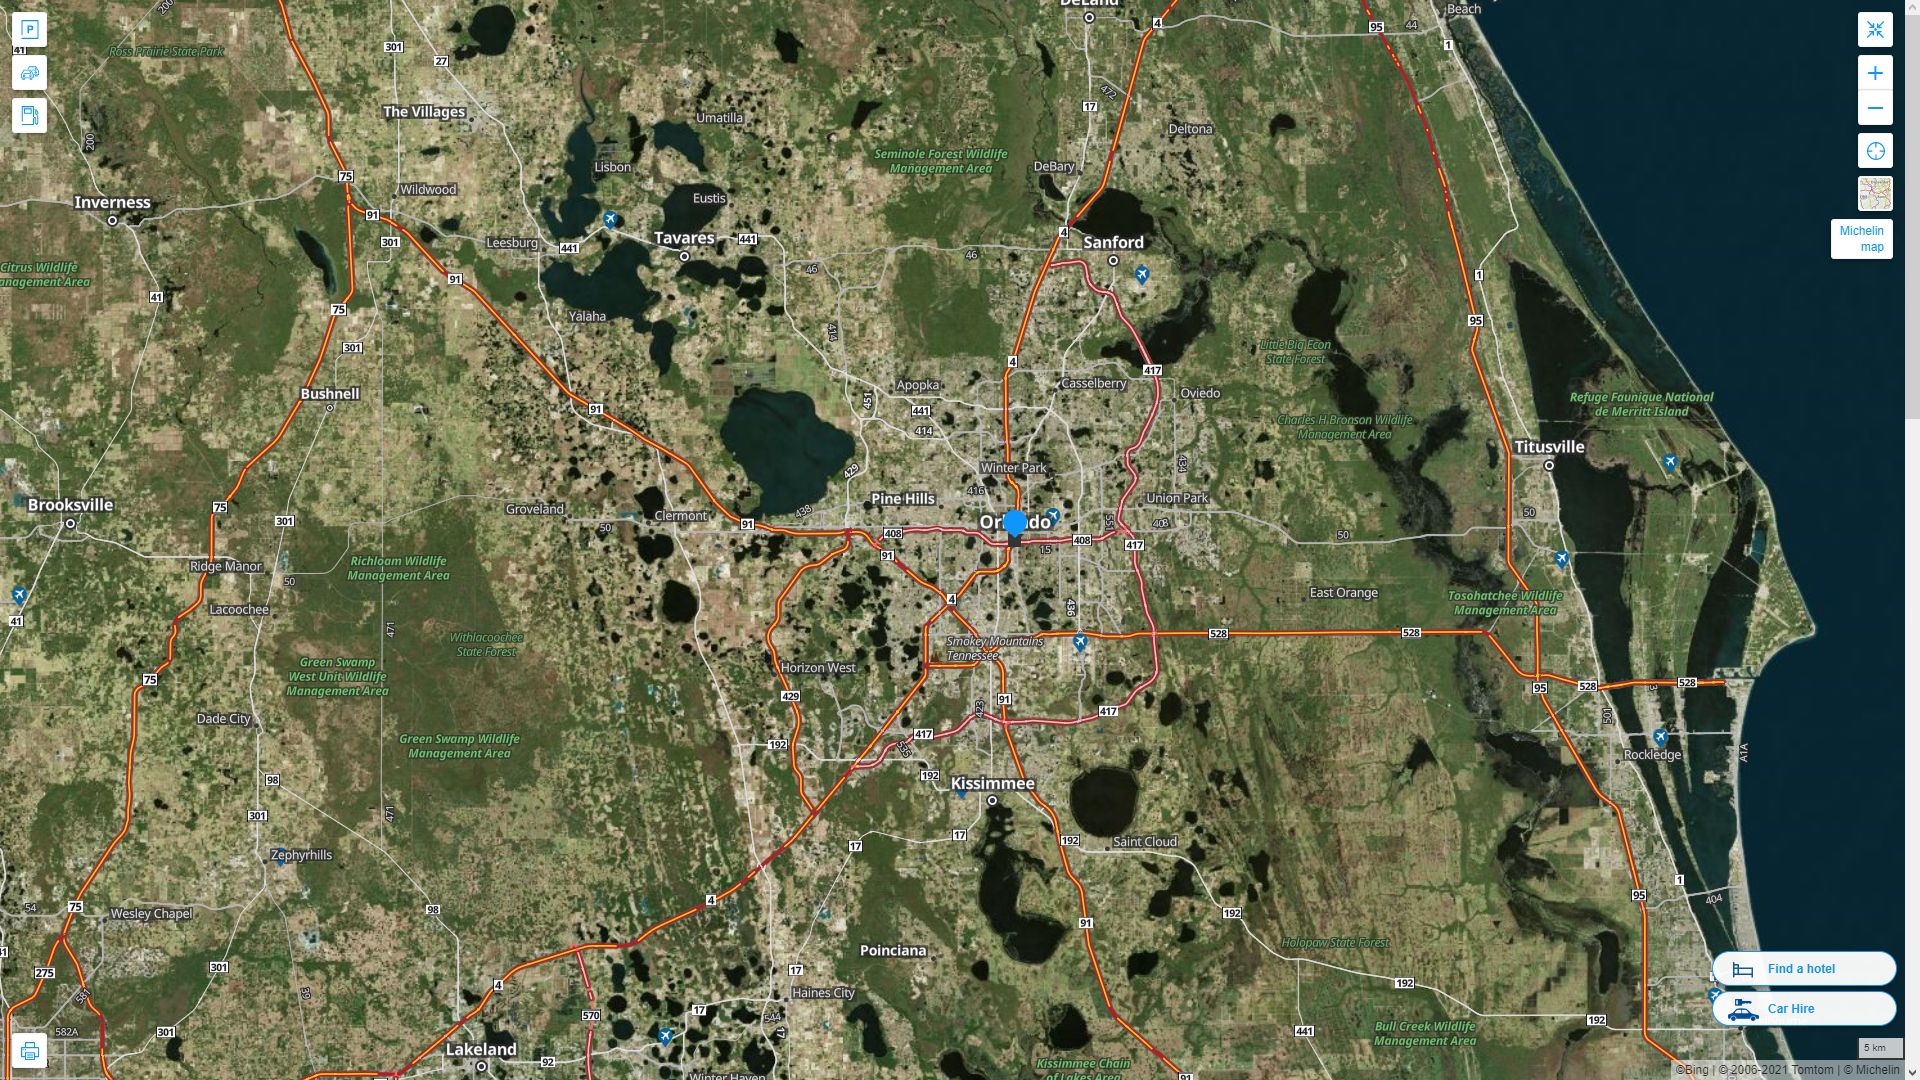 Orlando Florida Highway and Road Map with Satellite View